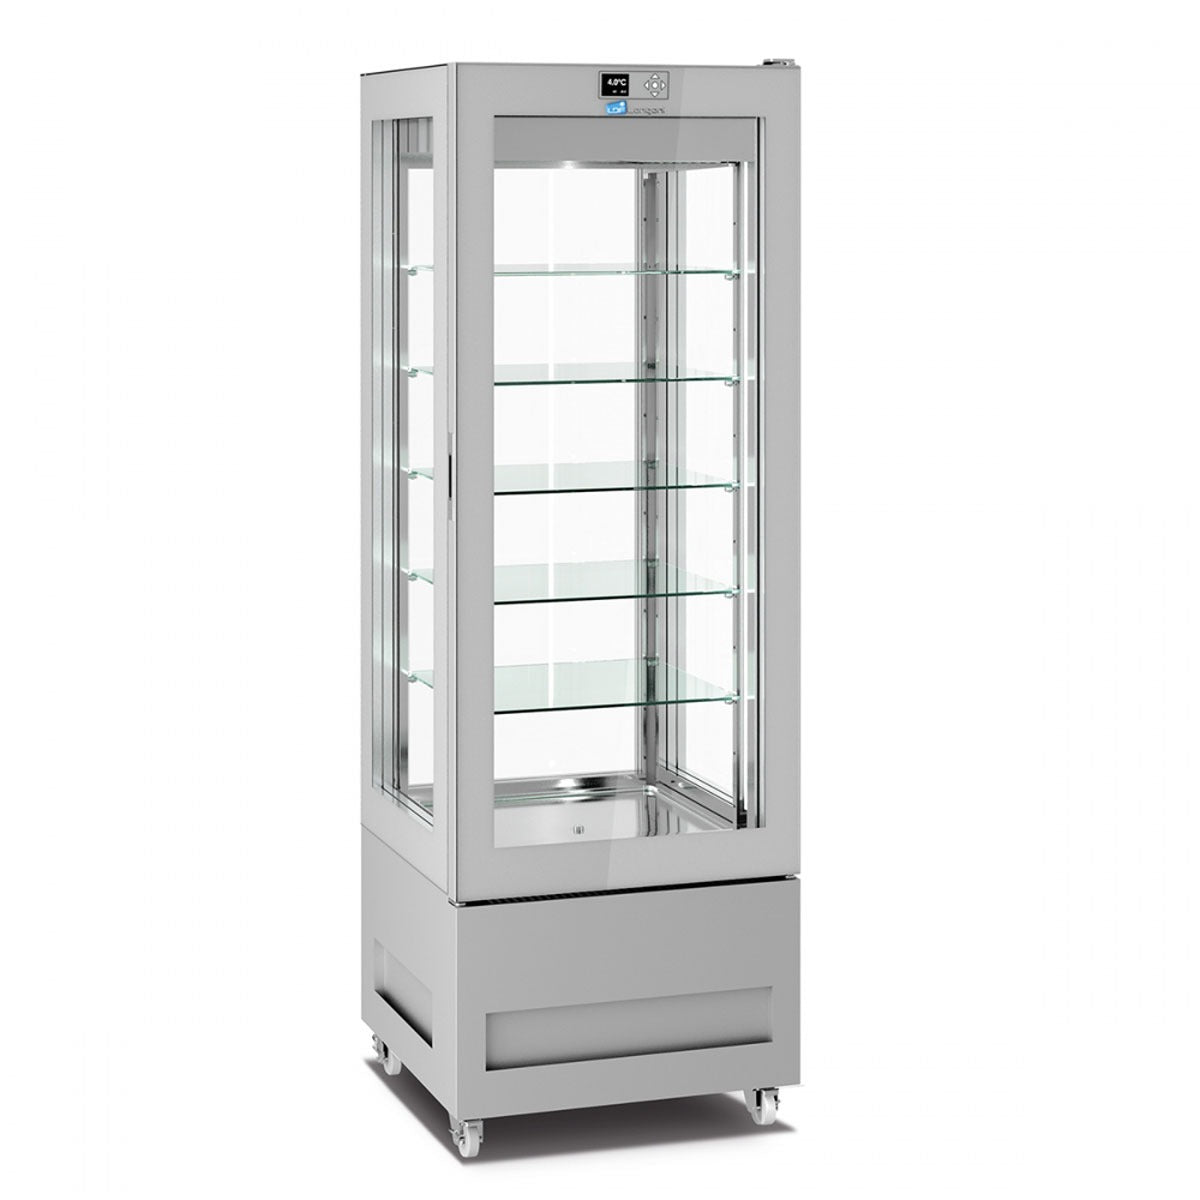 Positive refrigerated display case for pastry and ice cream, 450 liters